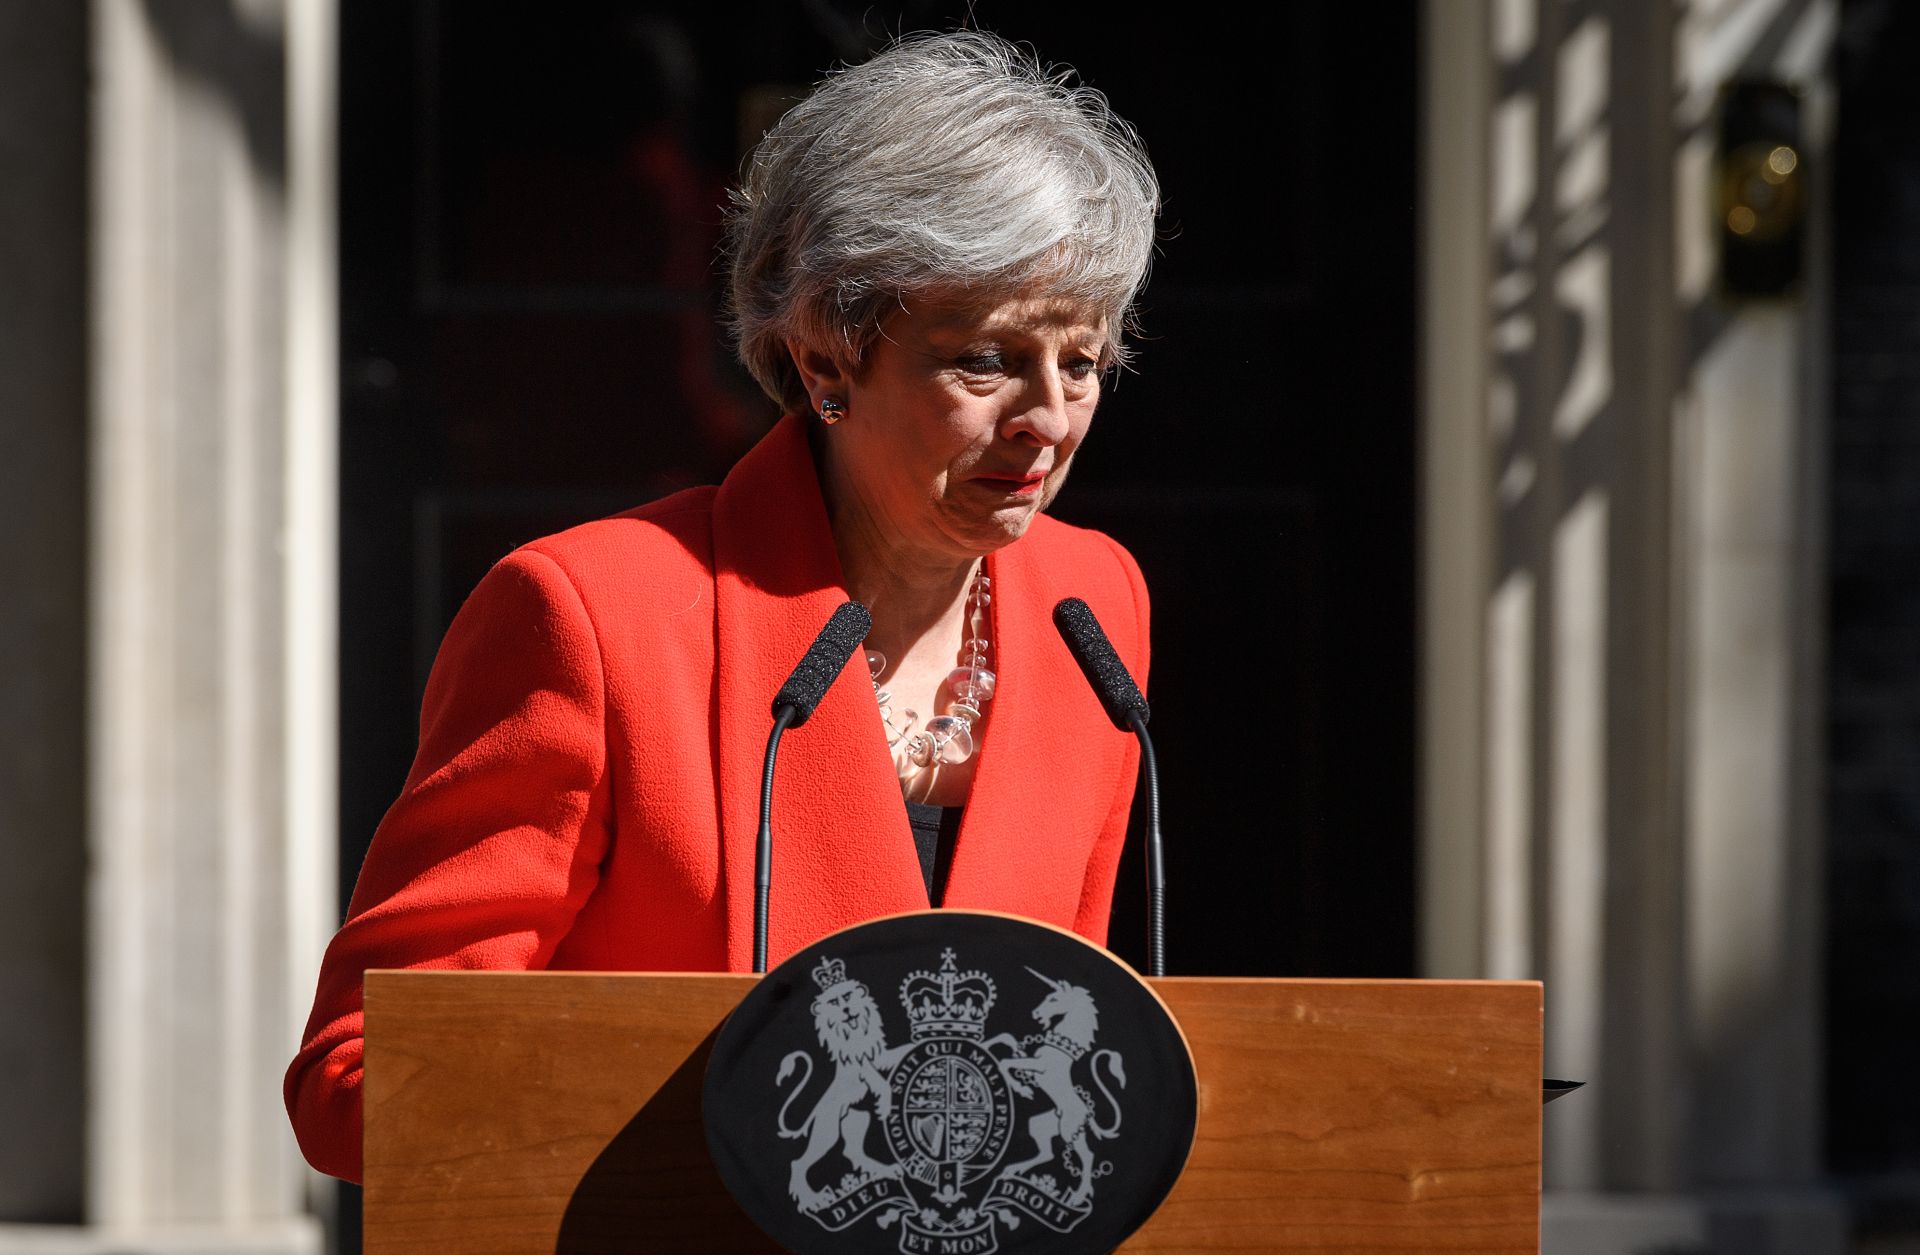 British Prime Minister Theresa May announces her resignation, effective June 7, 2019, outside 10 Downing Street in London on May 24, 2019.